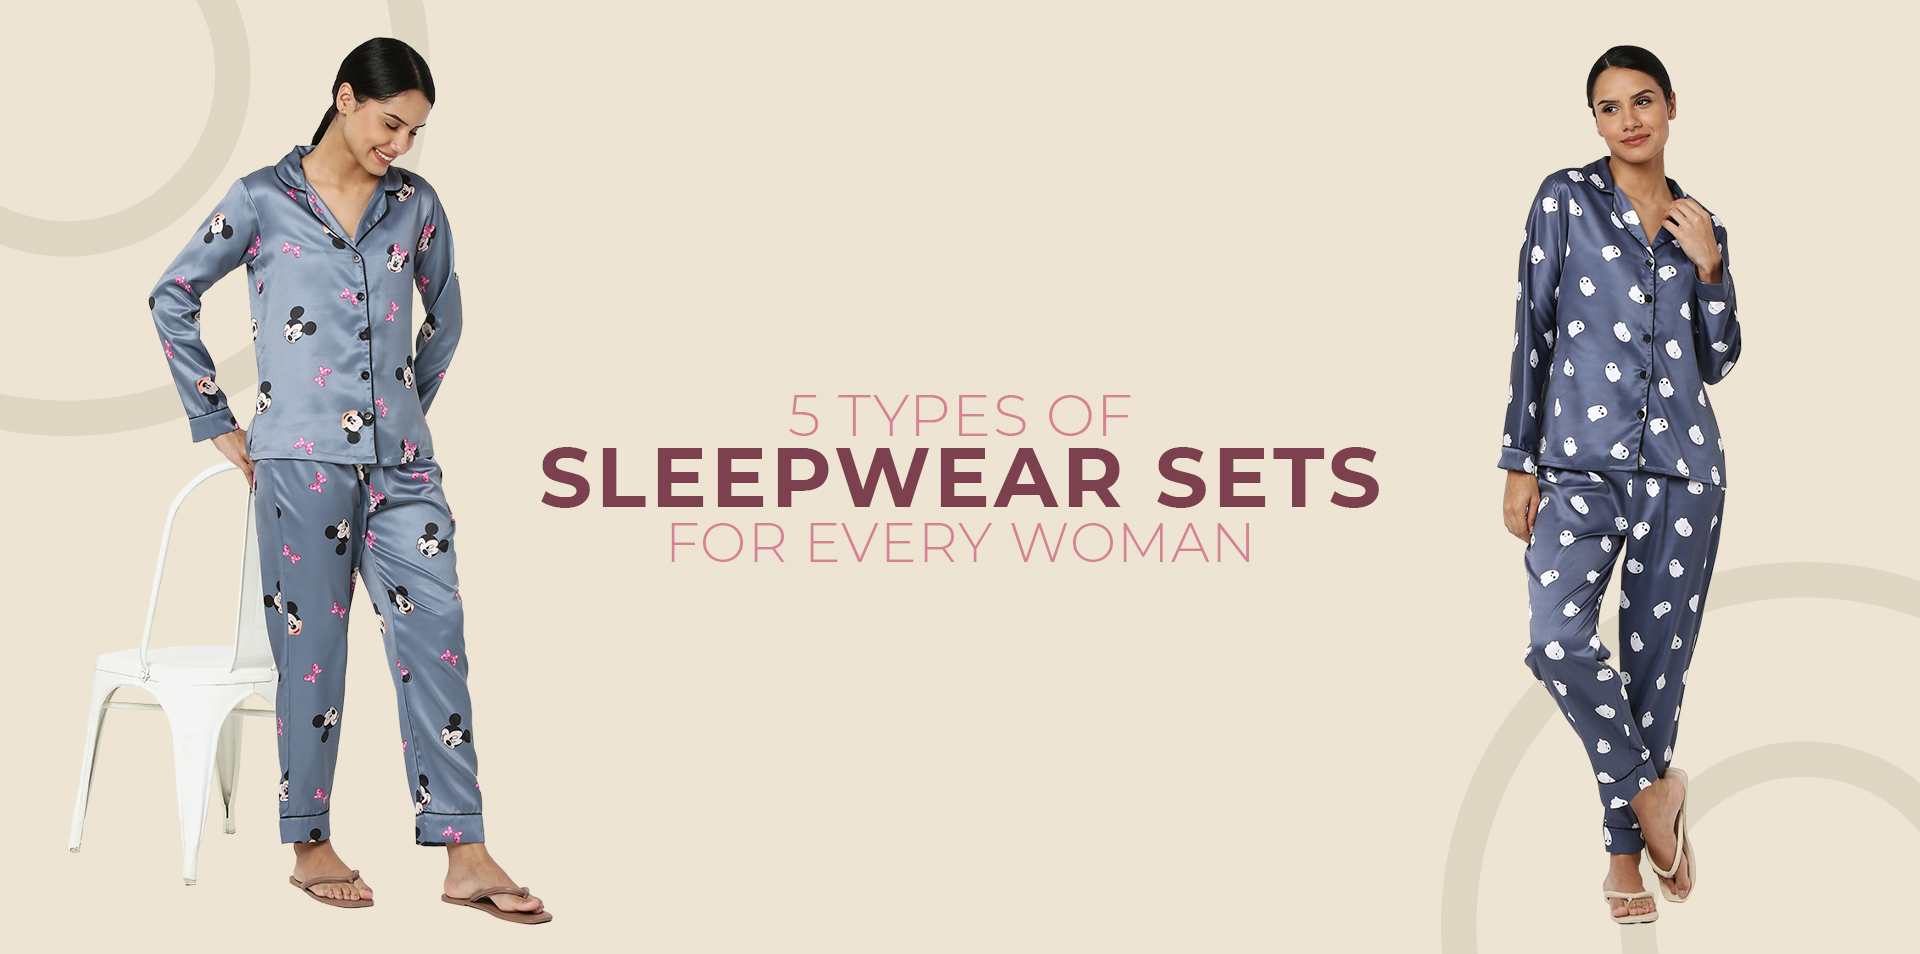 5 Types of Sleepwear Sets for Every Woman 